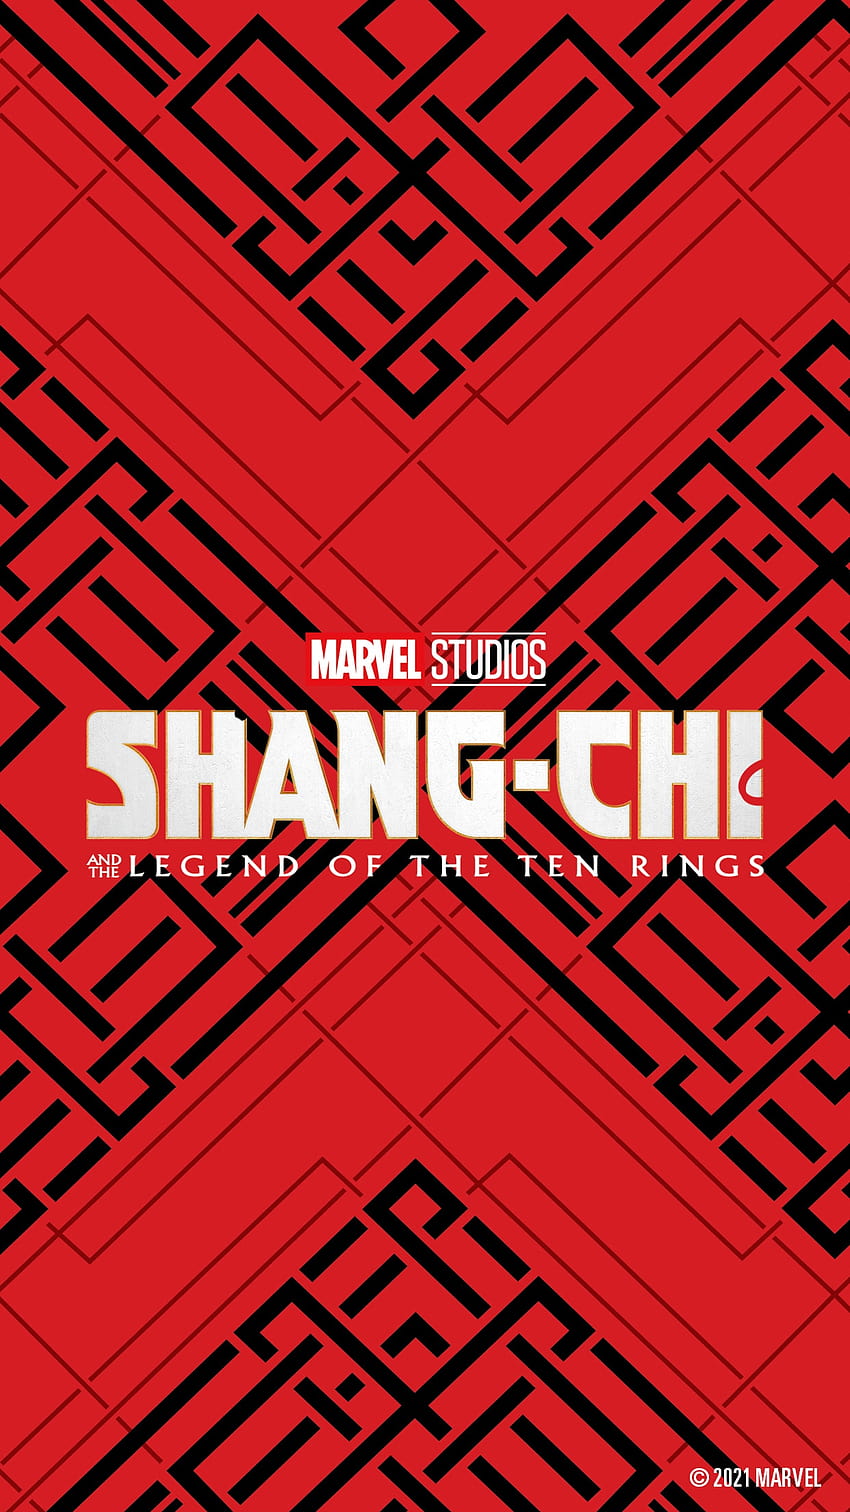 MOBILE INSPIRED BY MARVEL STUDIOS' SHANG, shang chi and the legend of the ten rings 2021 HD phone wallpaper